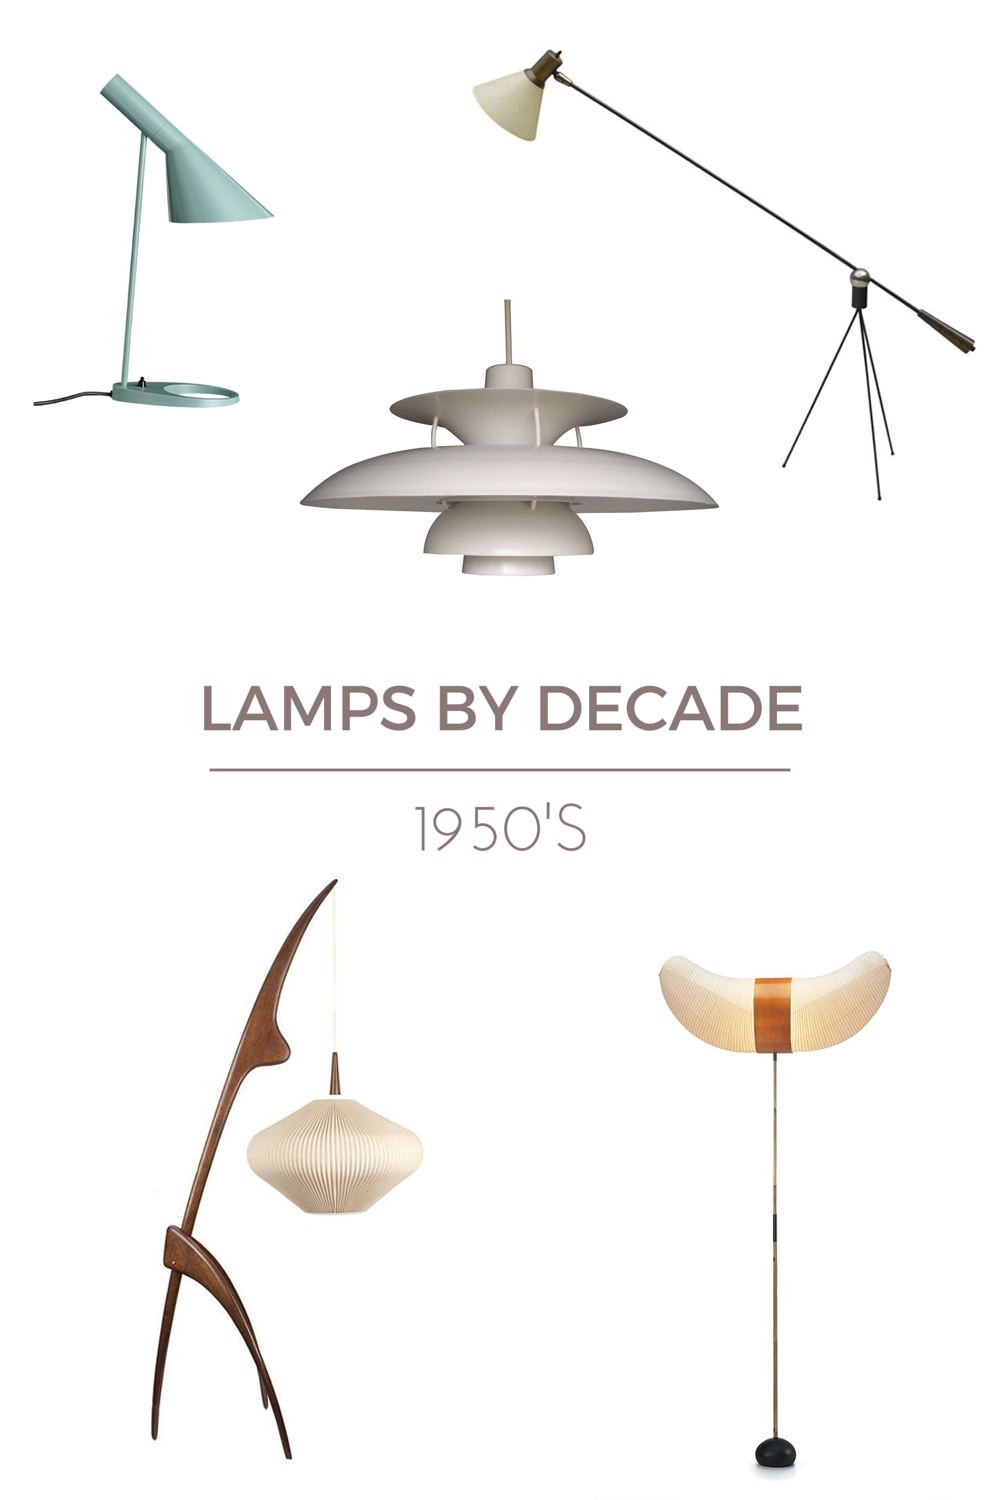 Lamps-by-decade-1950's